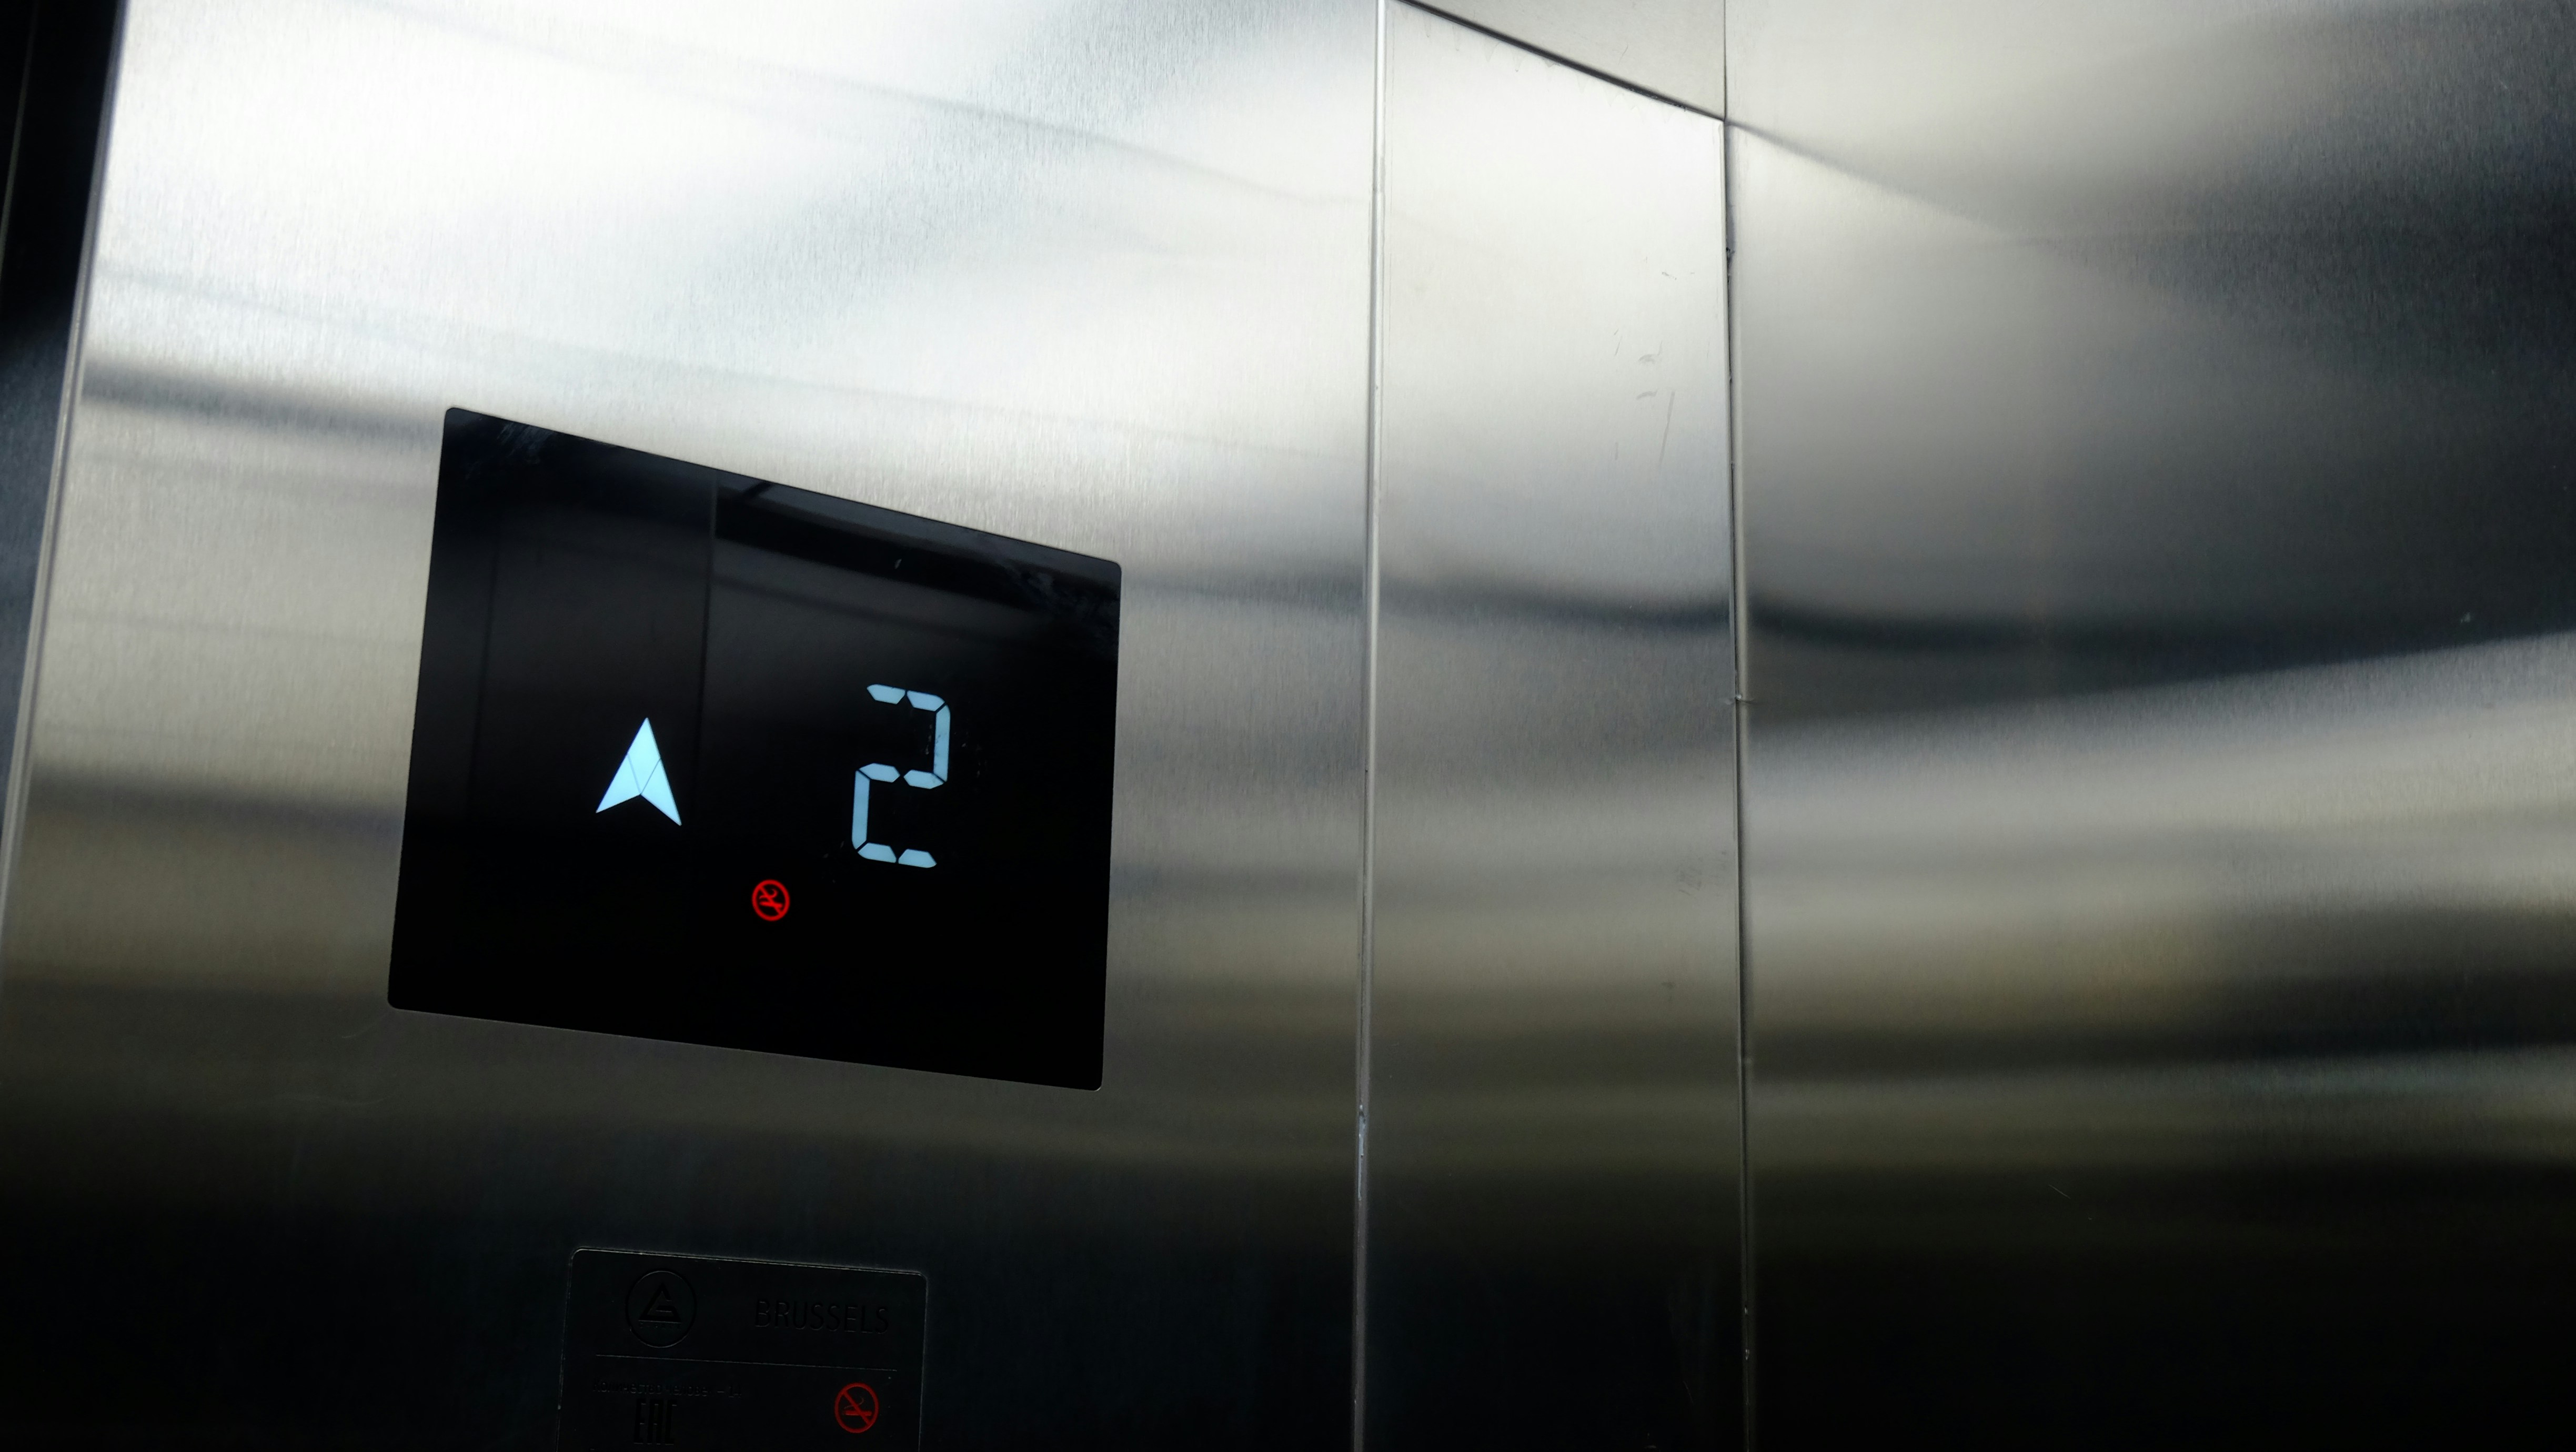 Steps to Take After an Elevator Accident